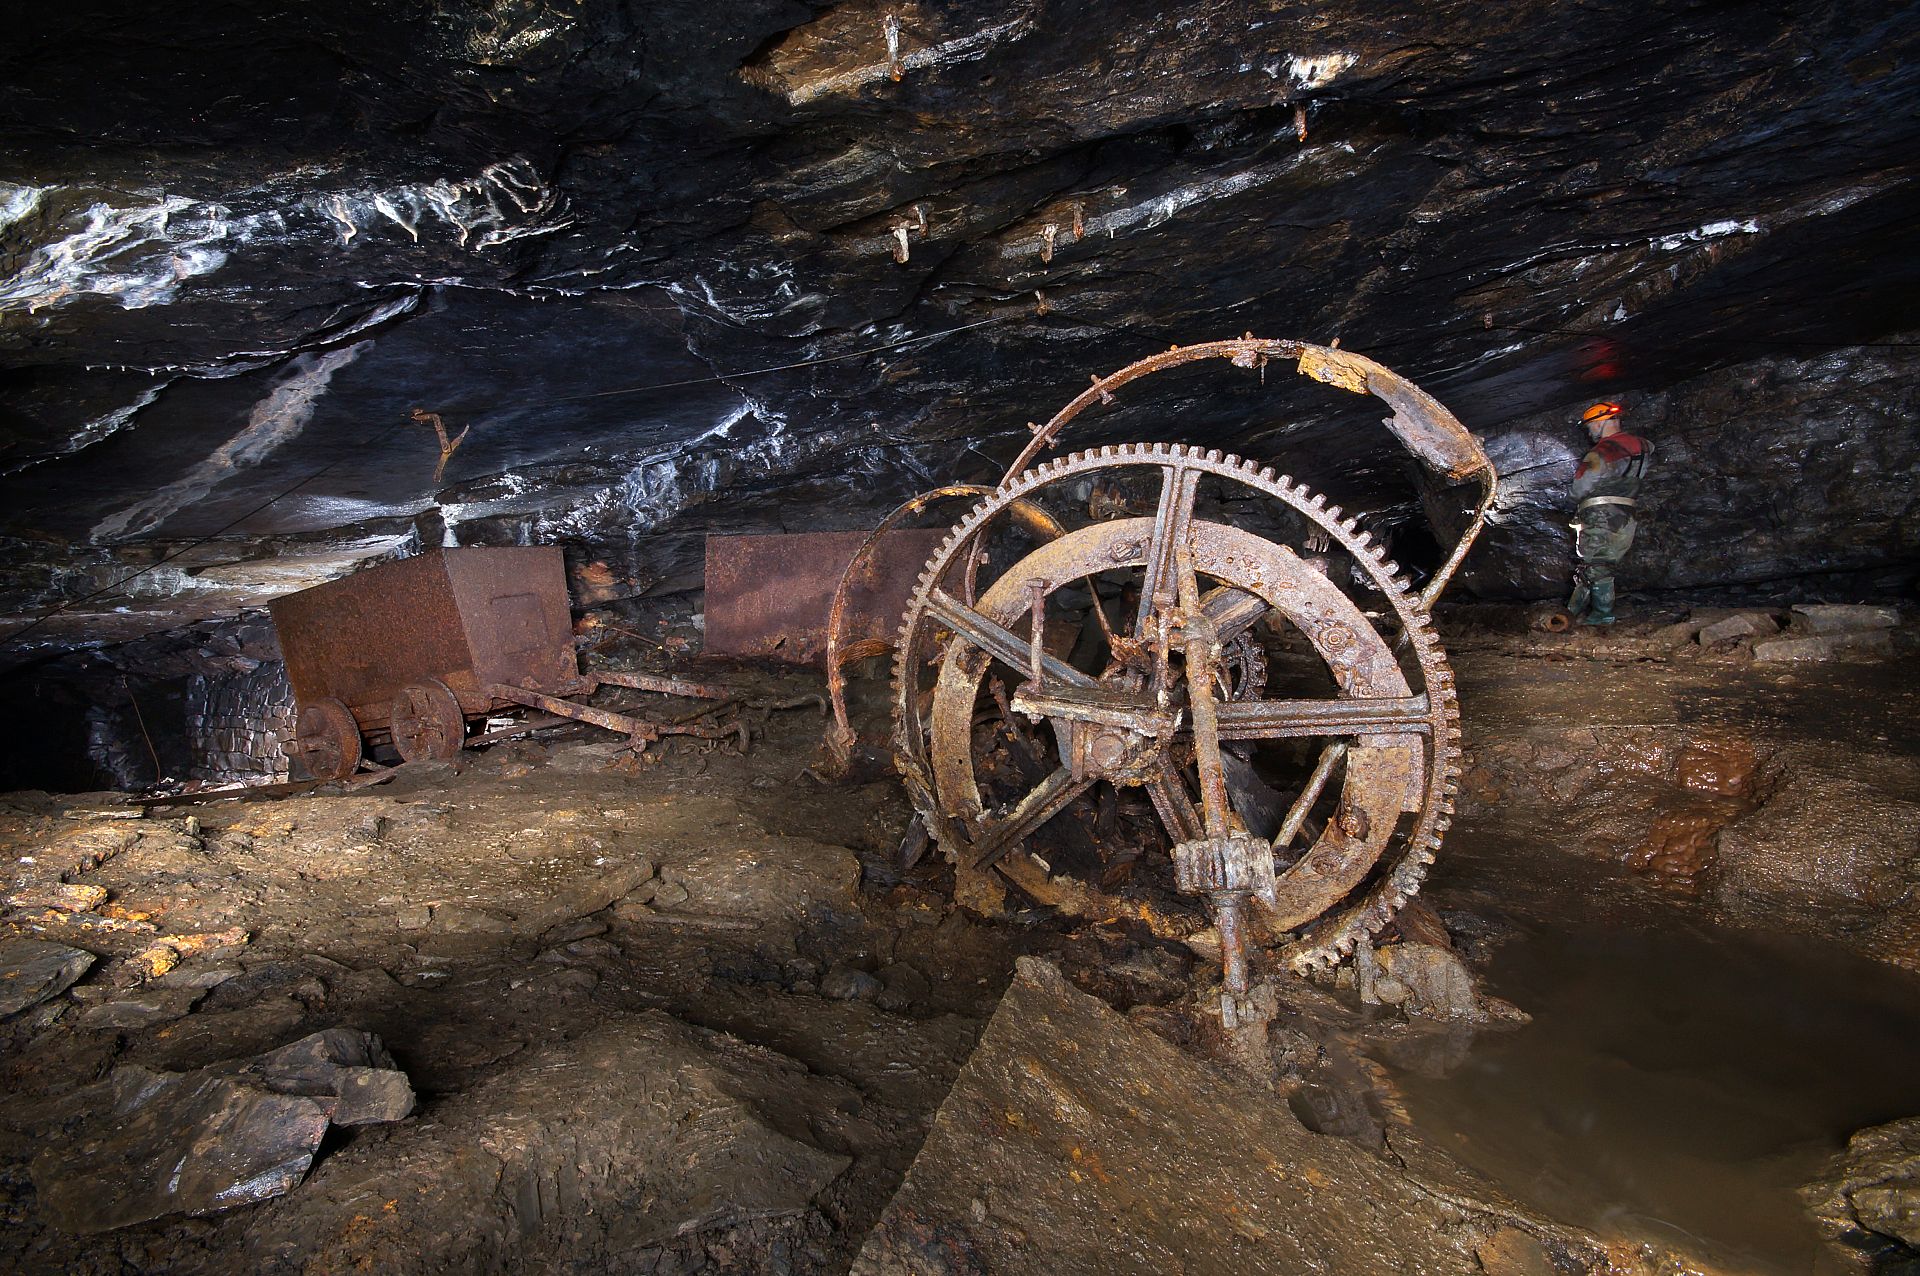 Expedition: Old mining